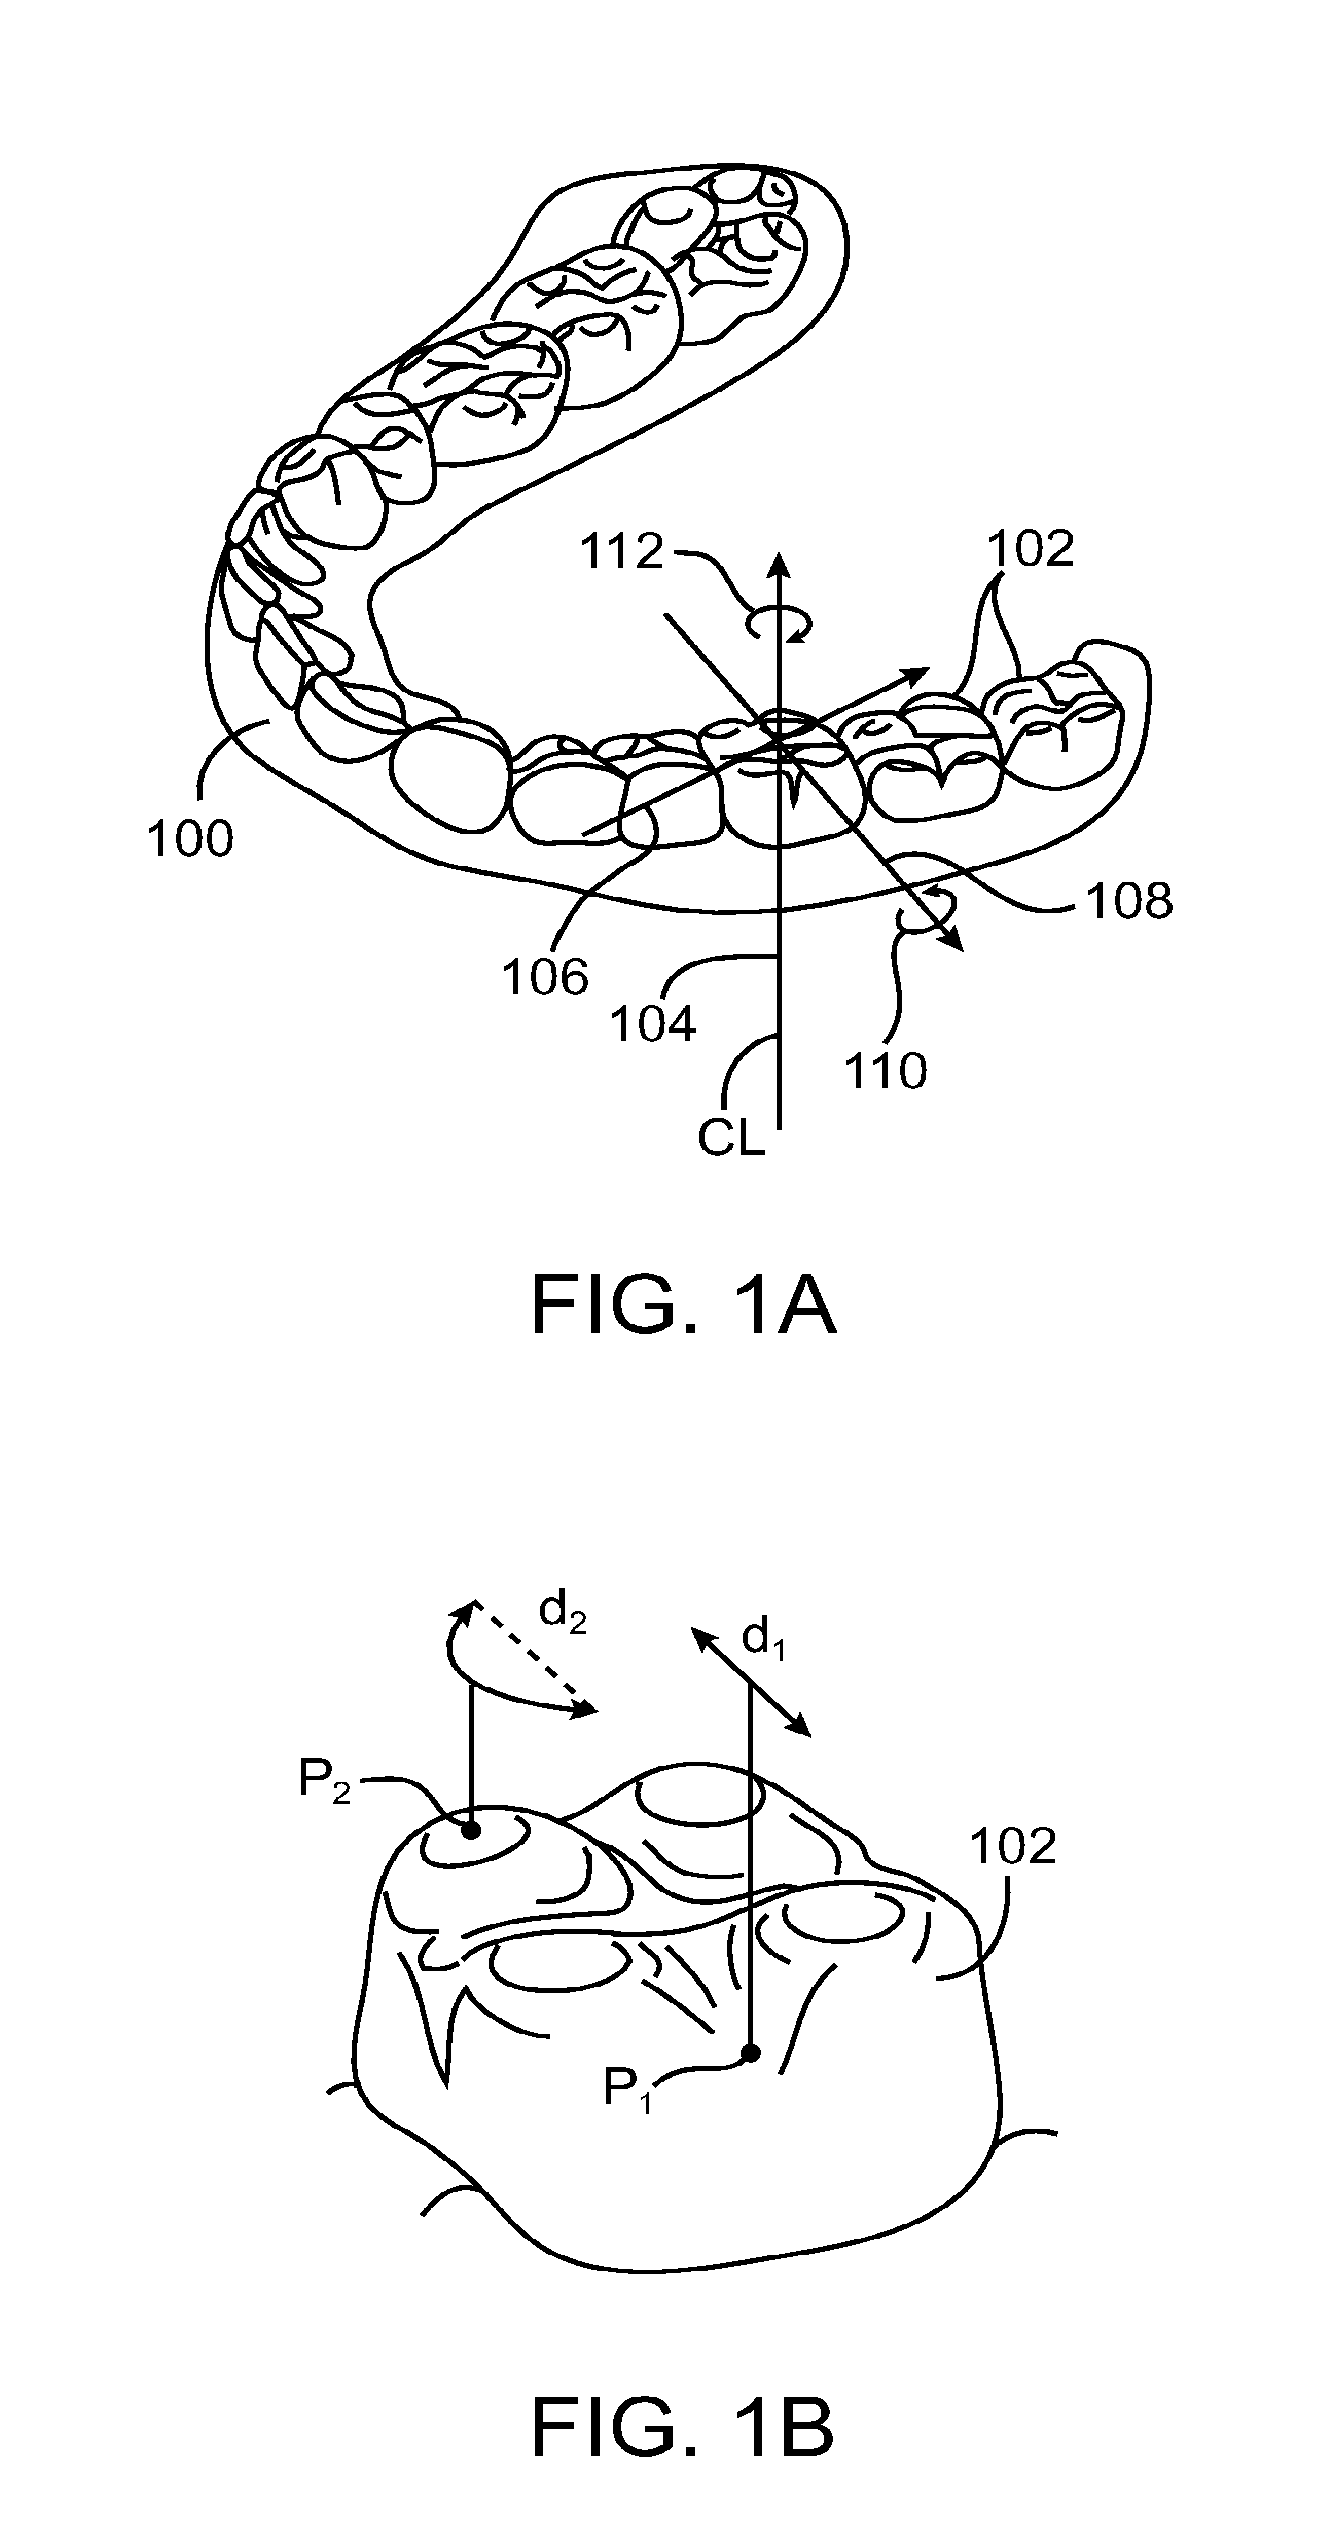 Computer automated development of an orthodontic treatment plan and appliance